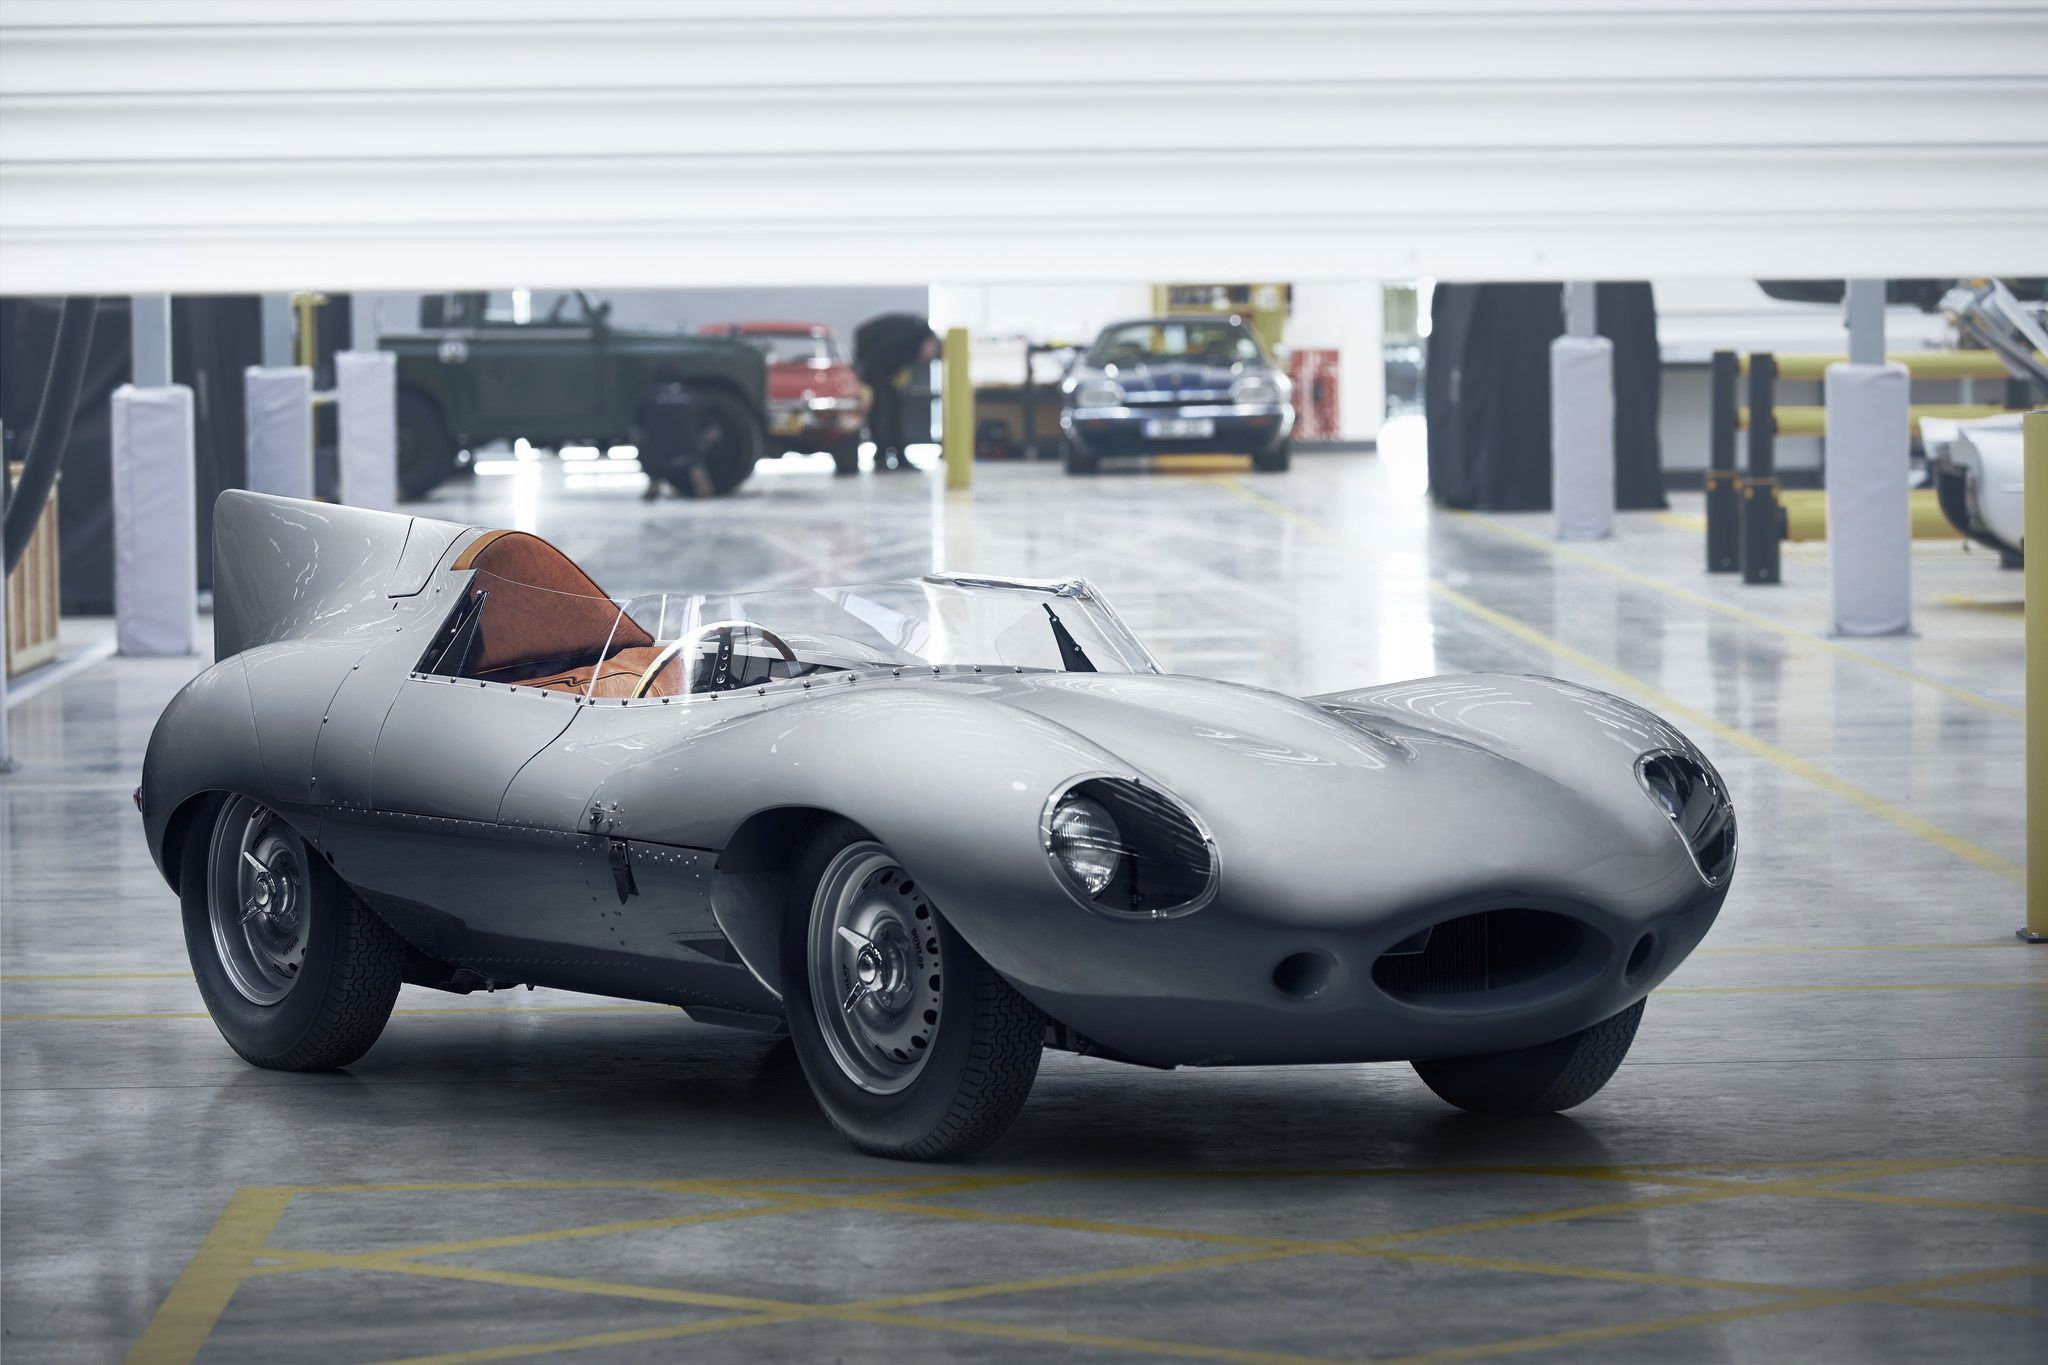 Jaguar Classic to Re-Start Production of the Iconic D-Type Race Car